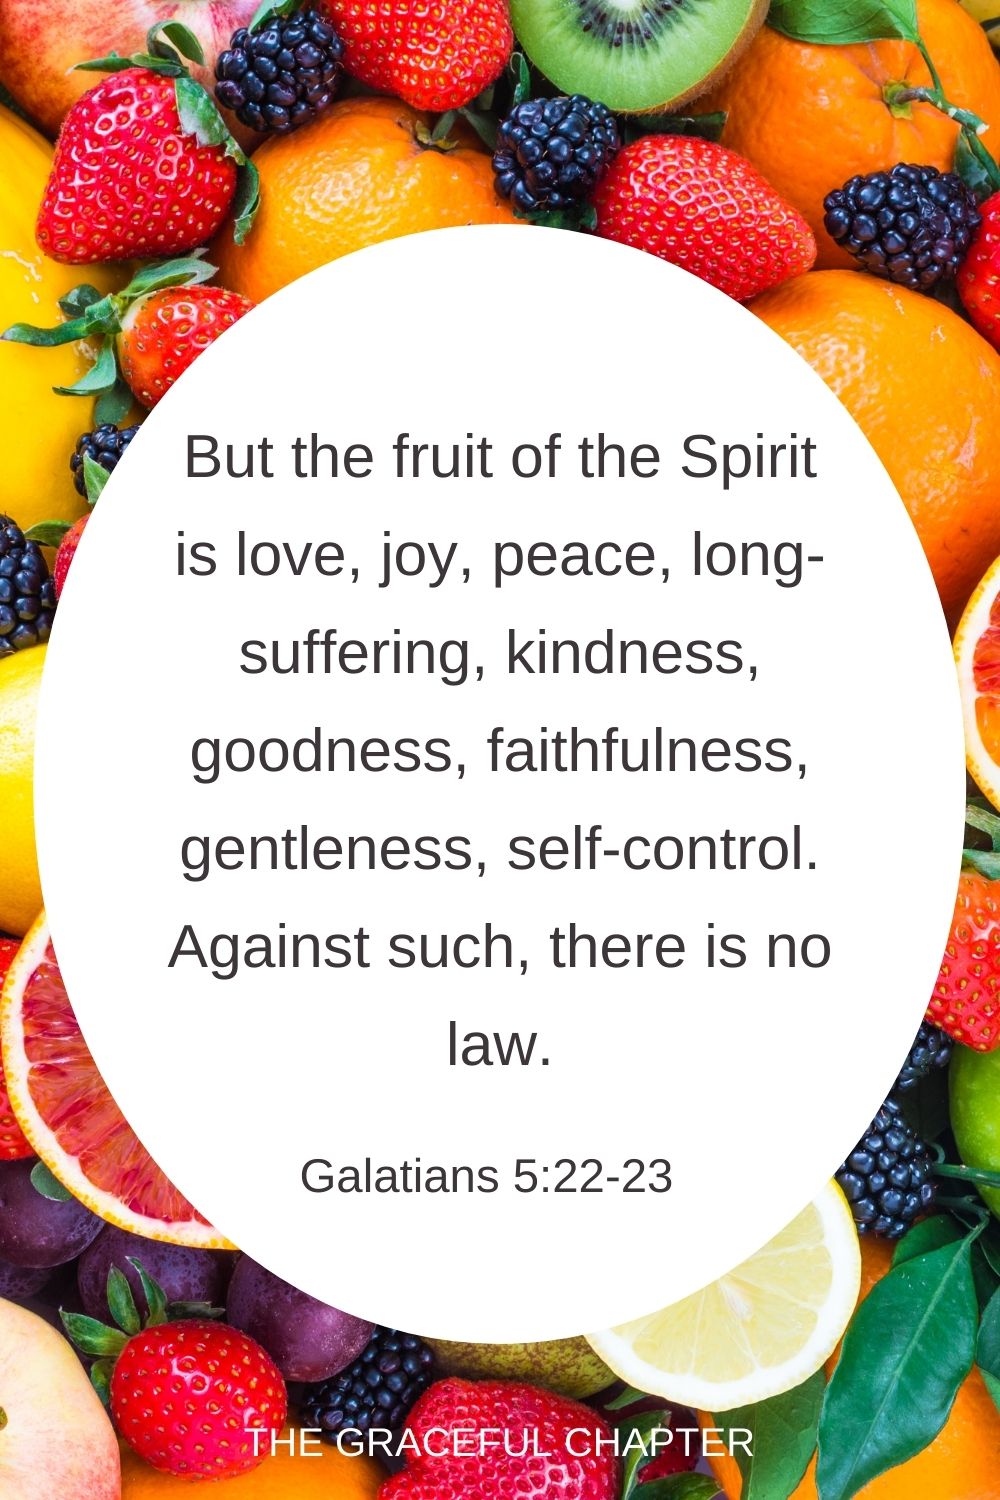 But the fruit of the Spirit is love, joy, peace, long-suffering, kindness, goodness, faithfulness, gentleness, self-control. Against such, there is no law. Galatians 5:22-23